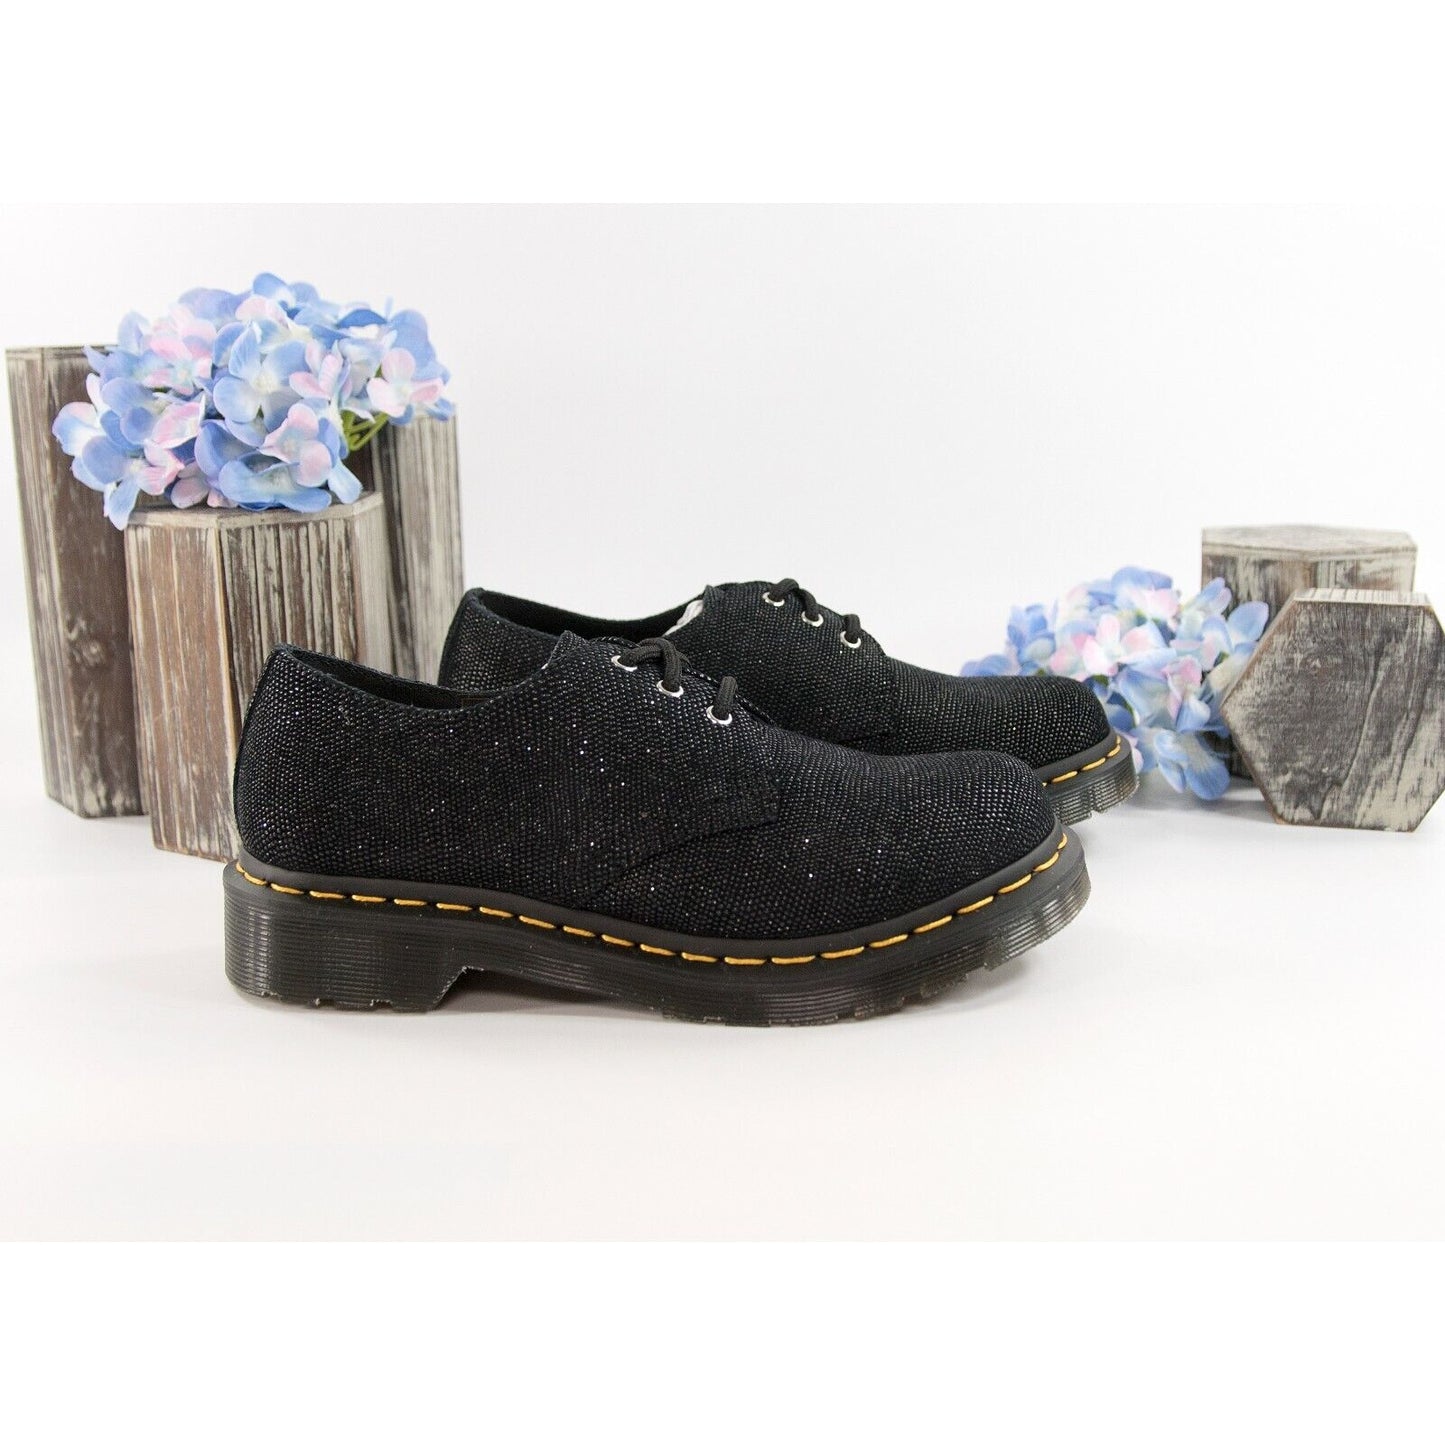 Dr. Martens Glitter Ray Black Leather Oxford Lace Up Shoes Size 6 NIB